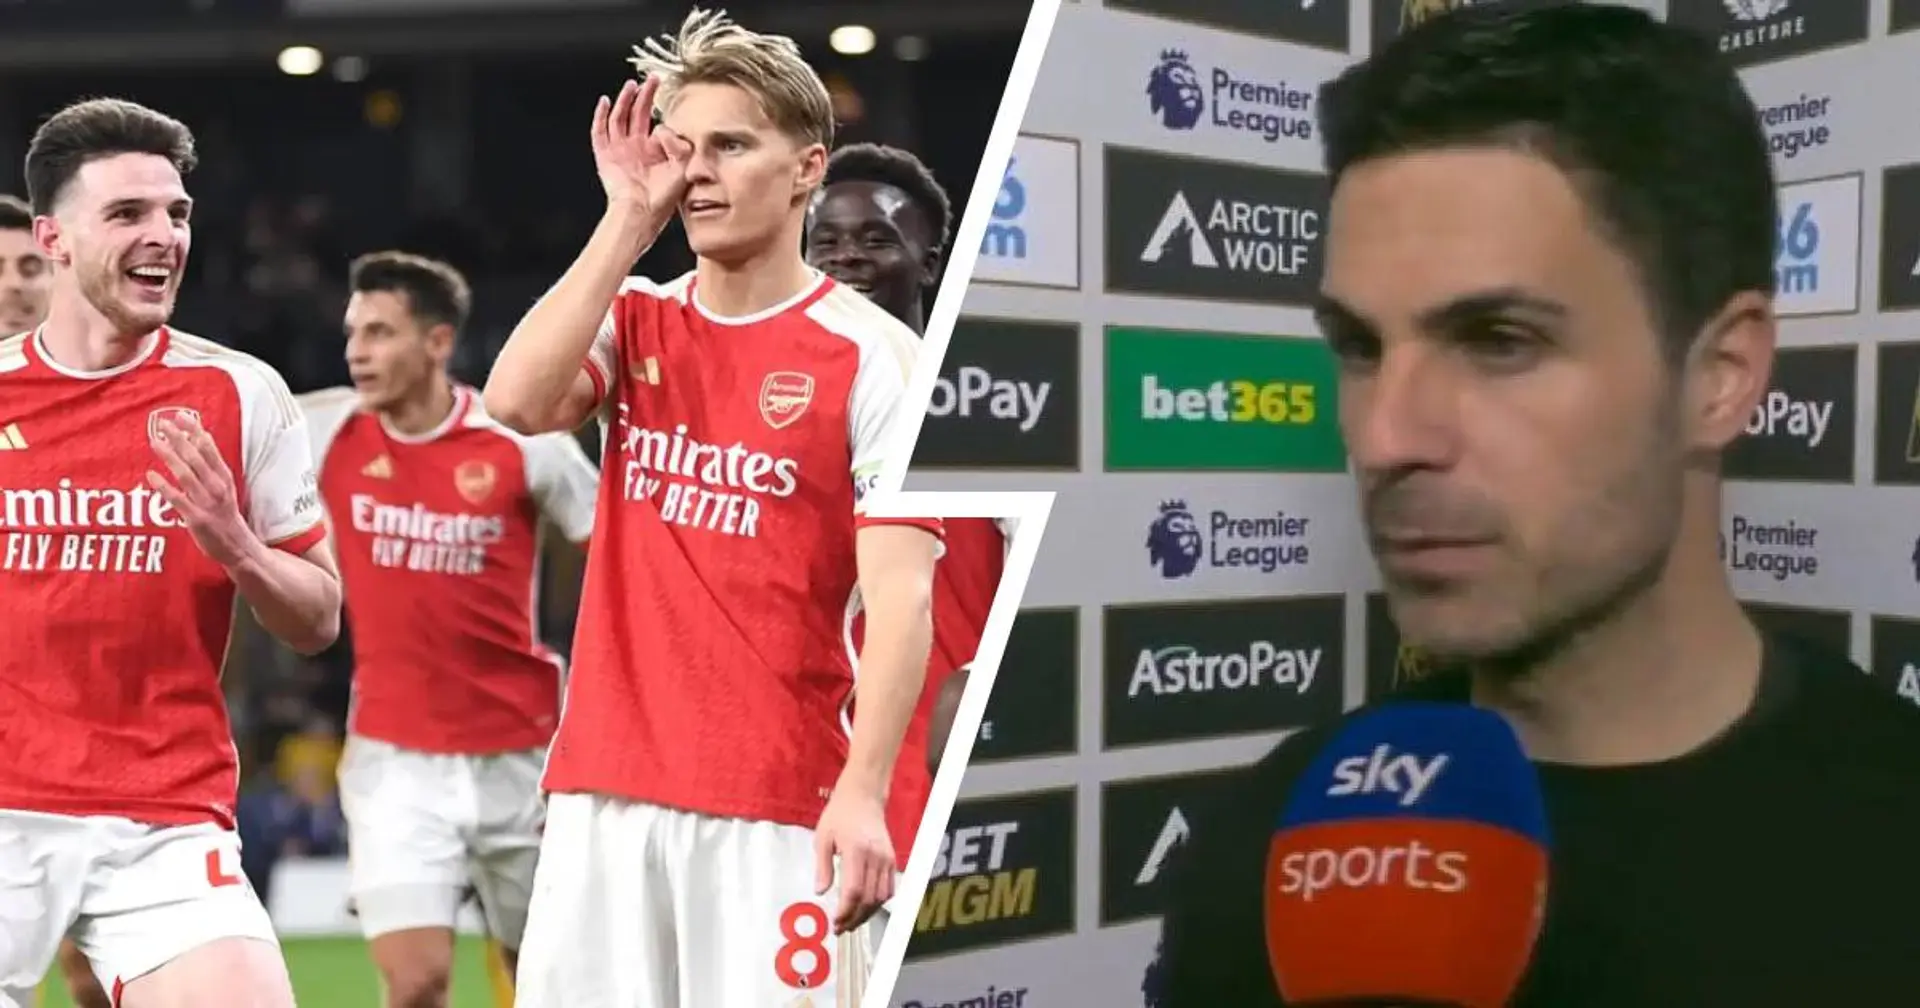 'We had 2 hours of sleep': Mikel Arteta details how Arsenal squad bounced back after Bayern Munich defeat